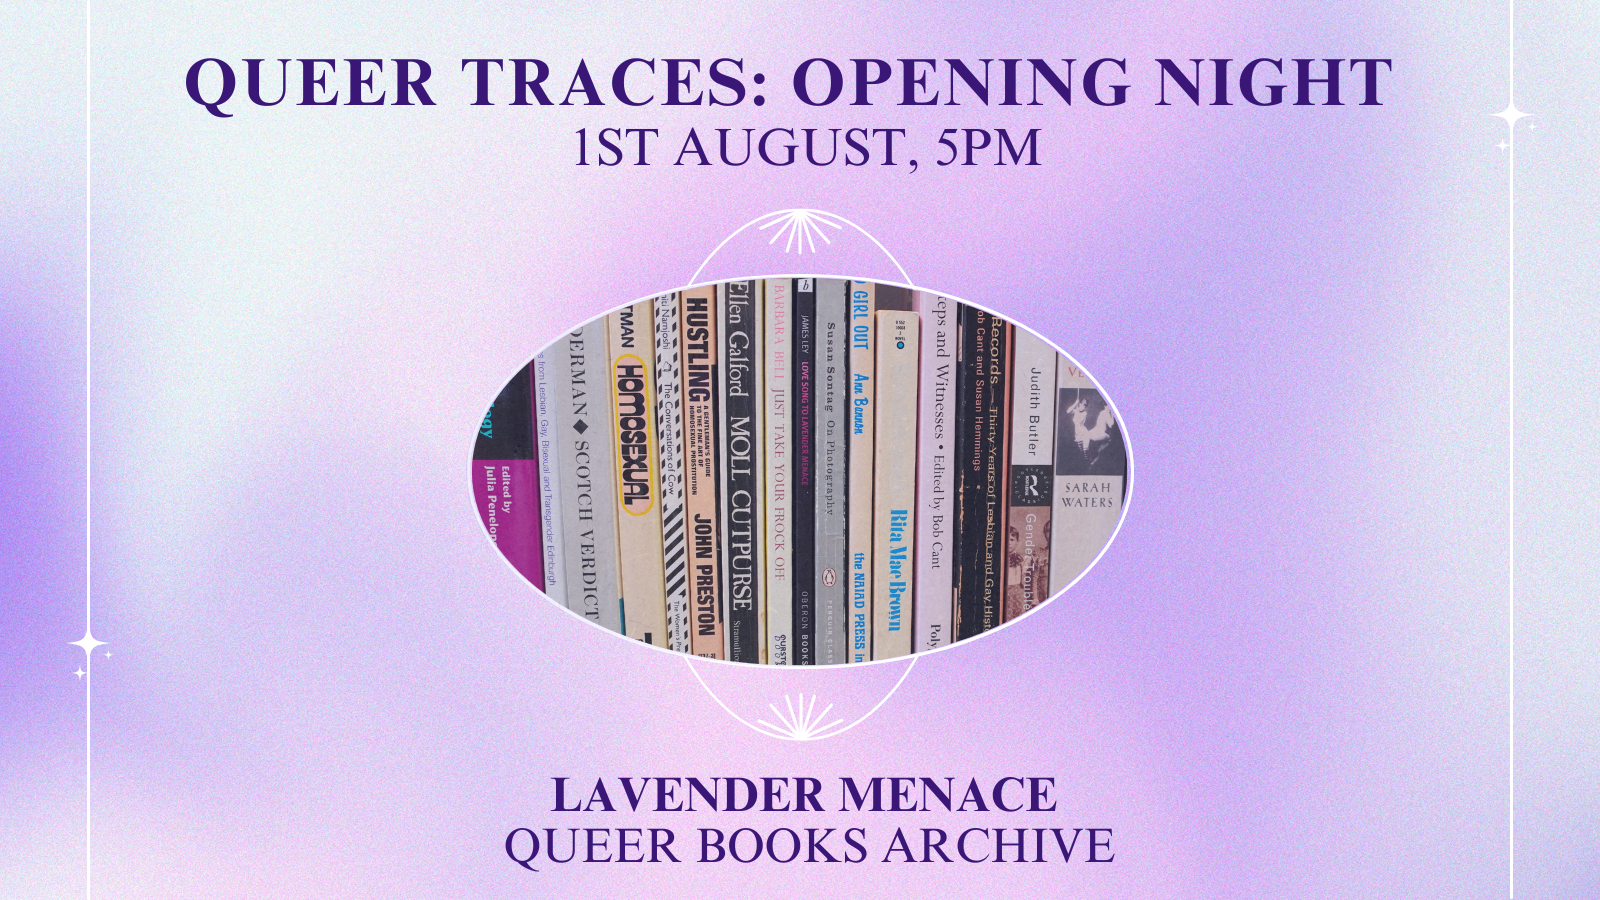 Decorative image with event information and a photo of queer books